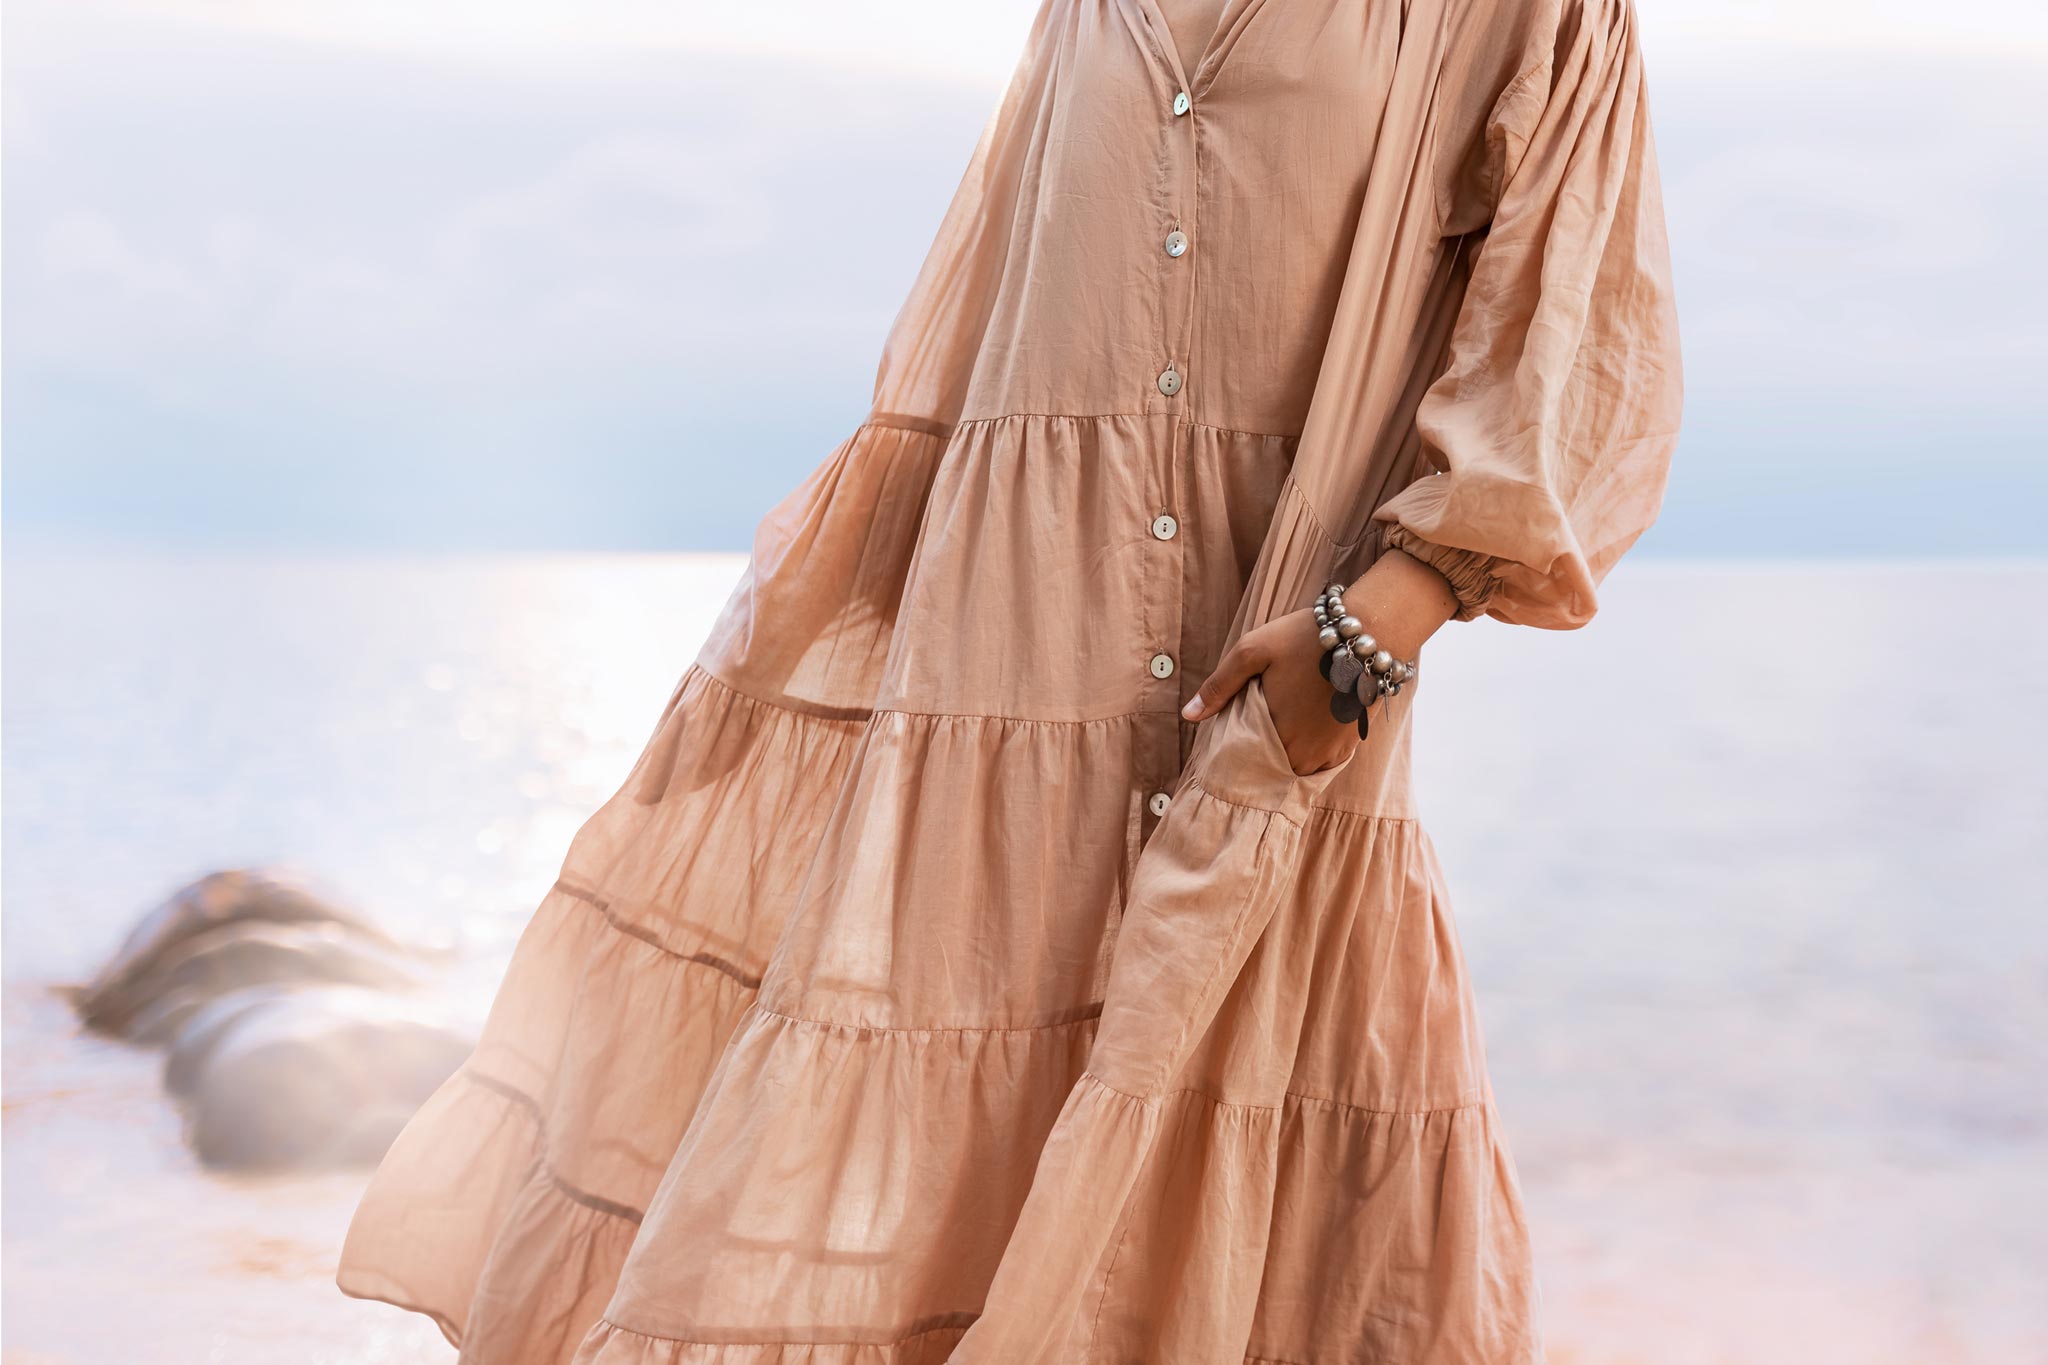 Beige bohemian-inspired prom dress – A lovely light cotton dress that is perfect for any formal occasion with a hint of bohemian flair.